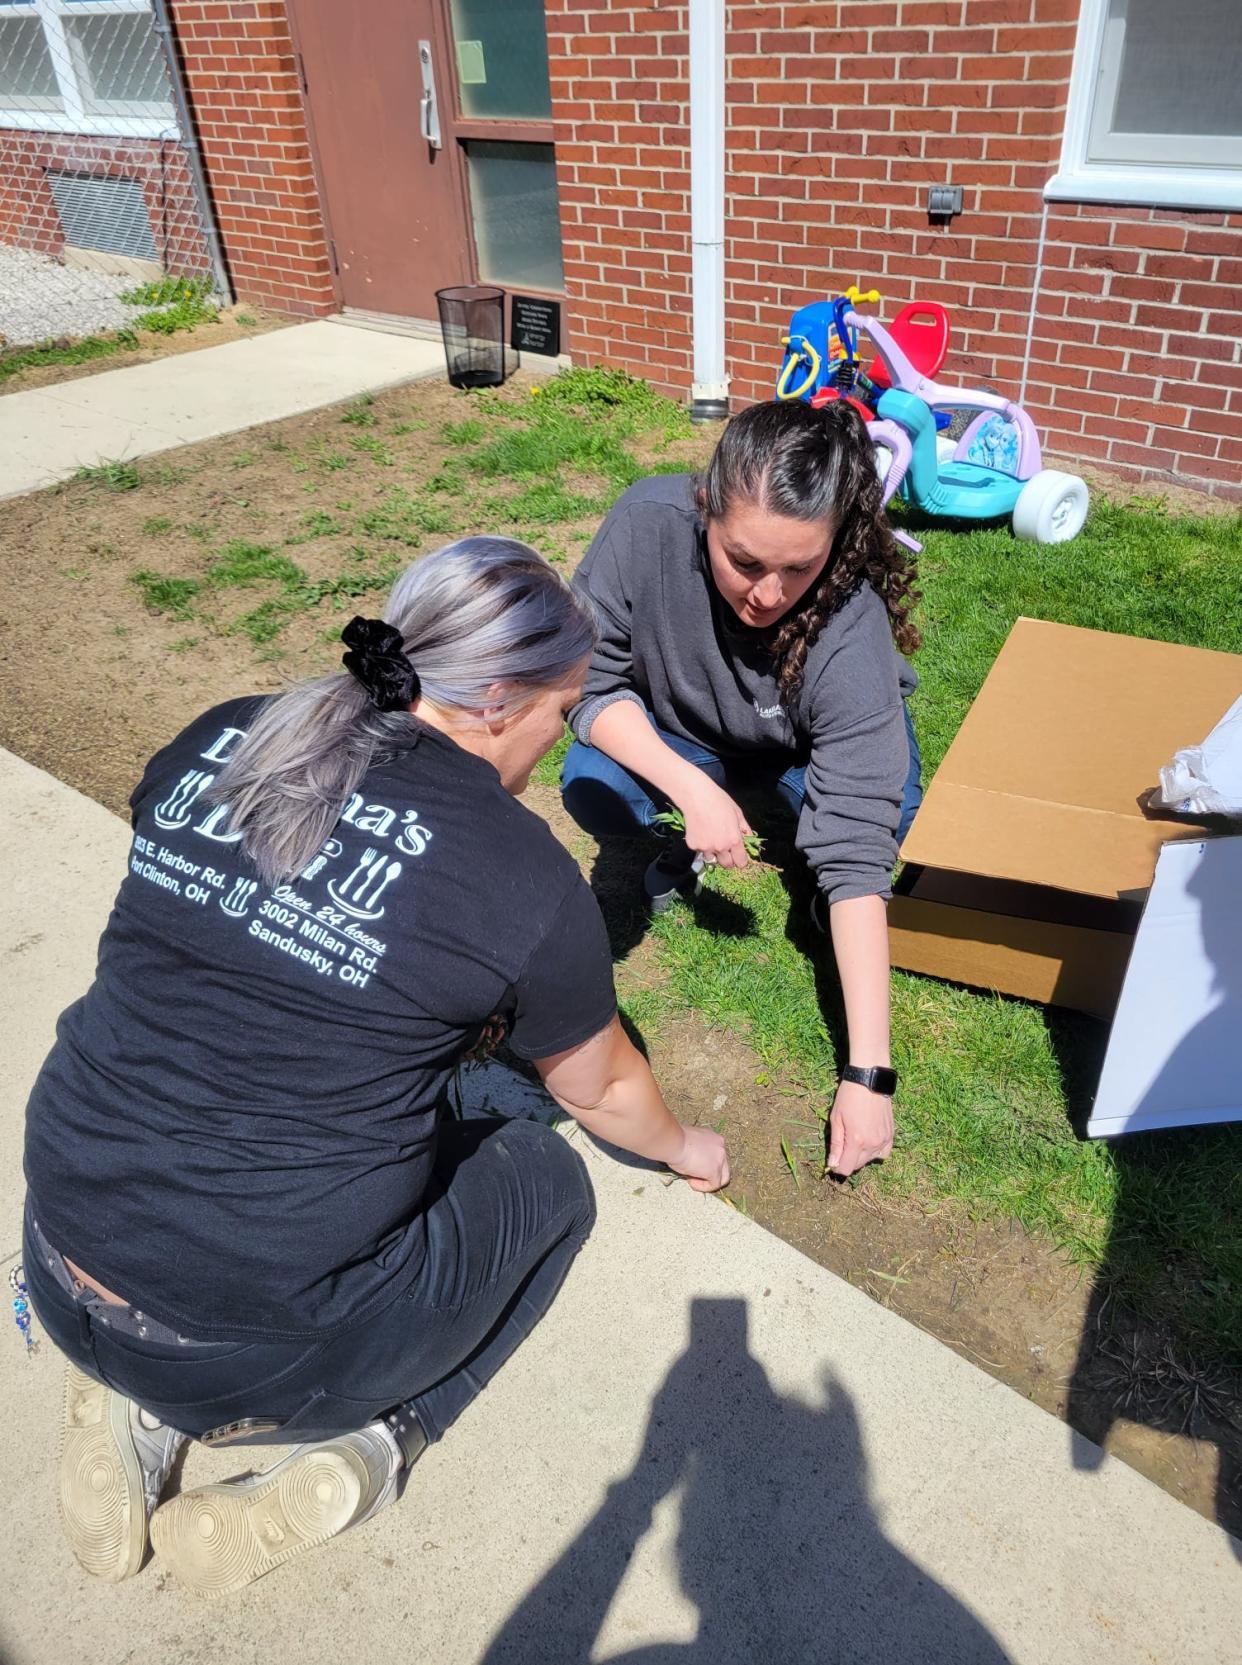 Members of the Ottawa County Specialized Docket program aid in cleaning up at Joyful Connections in Oak Harbor.